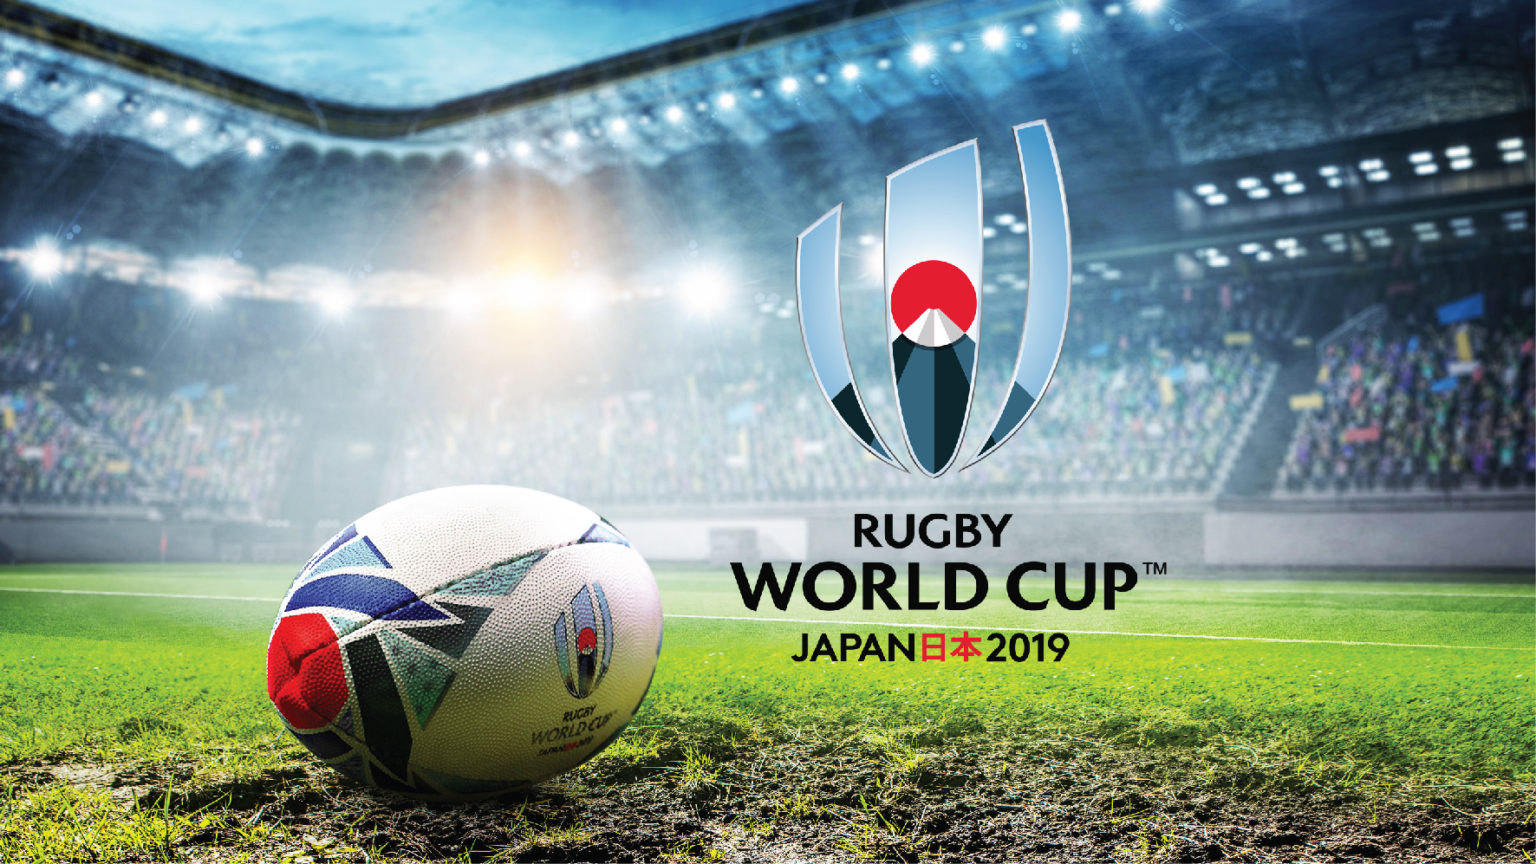 Rugby World Cup Ιαπωνία 2019